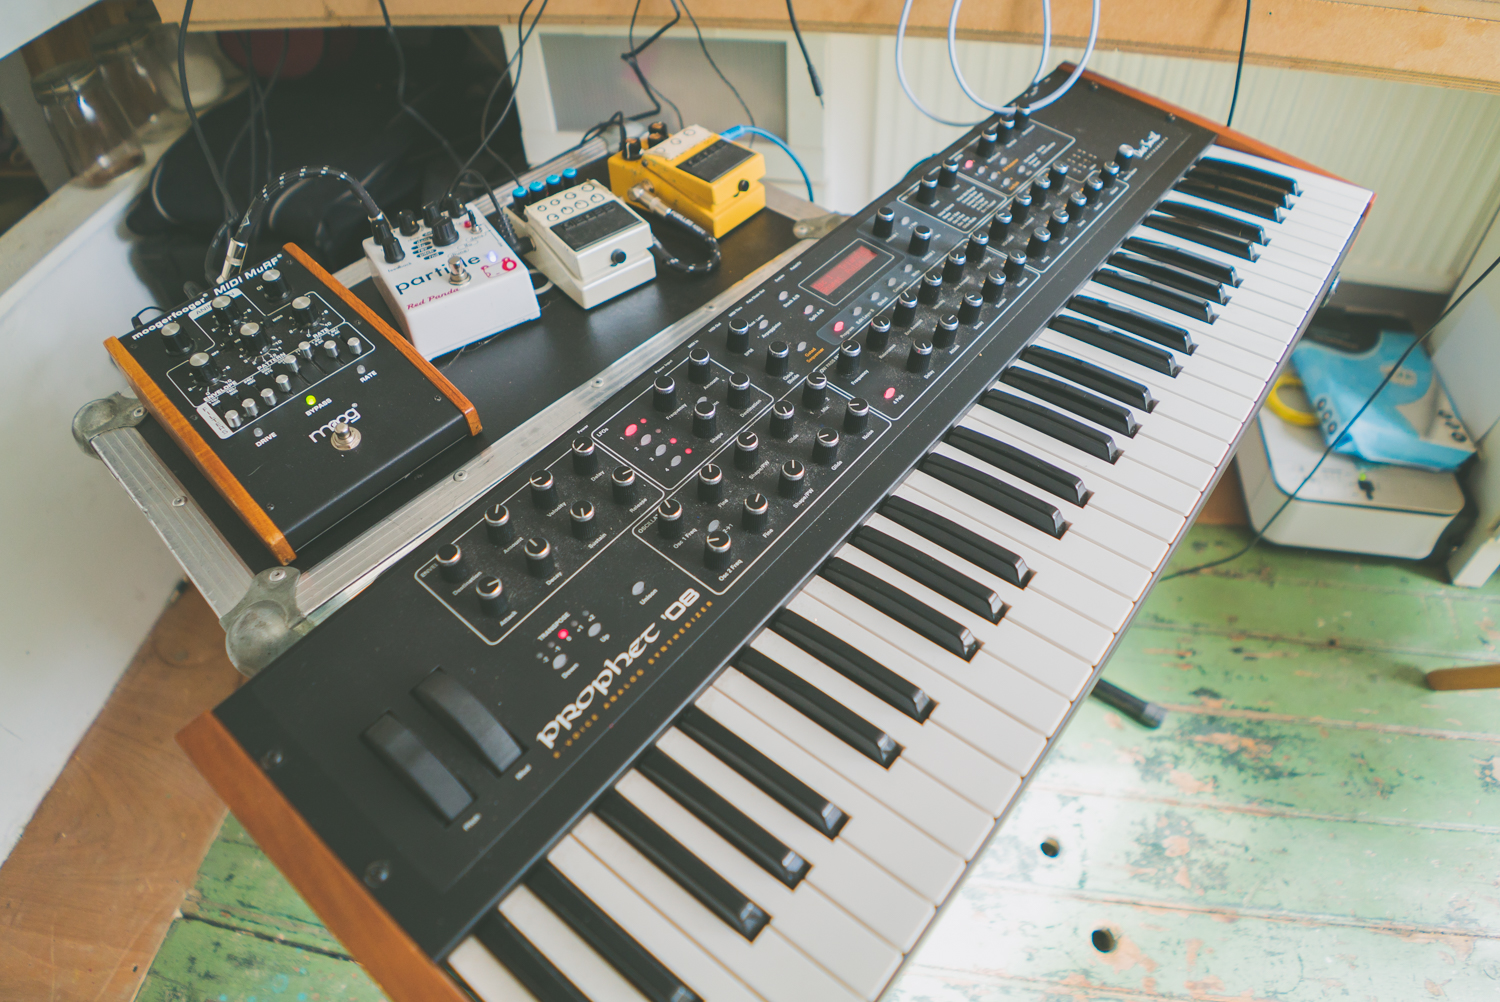 rival-consoles-by-pawel-ptak-06